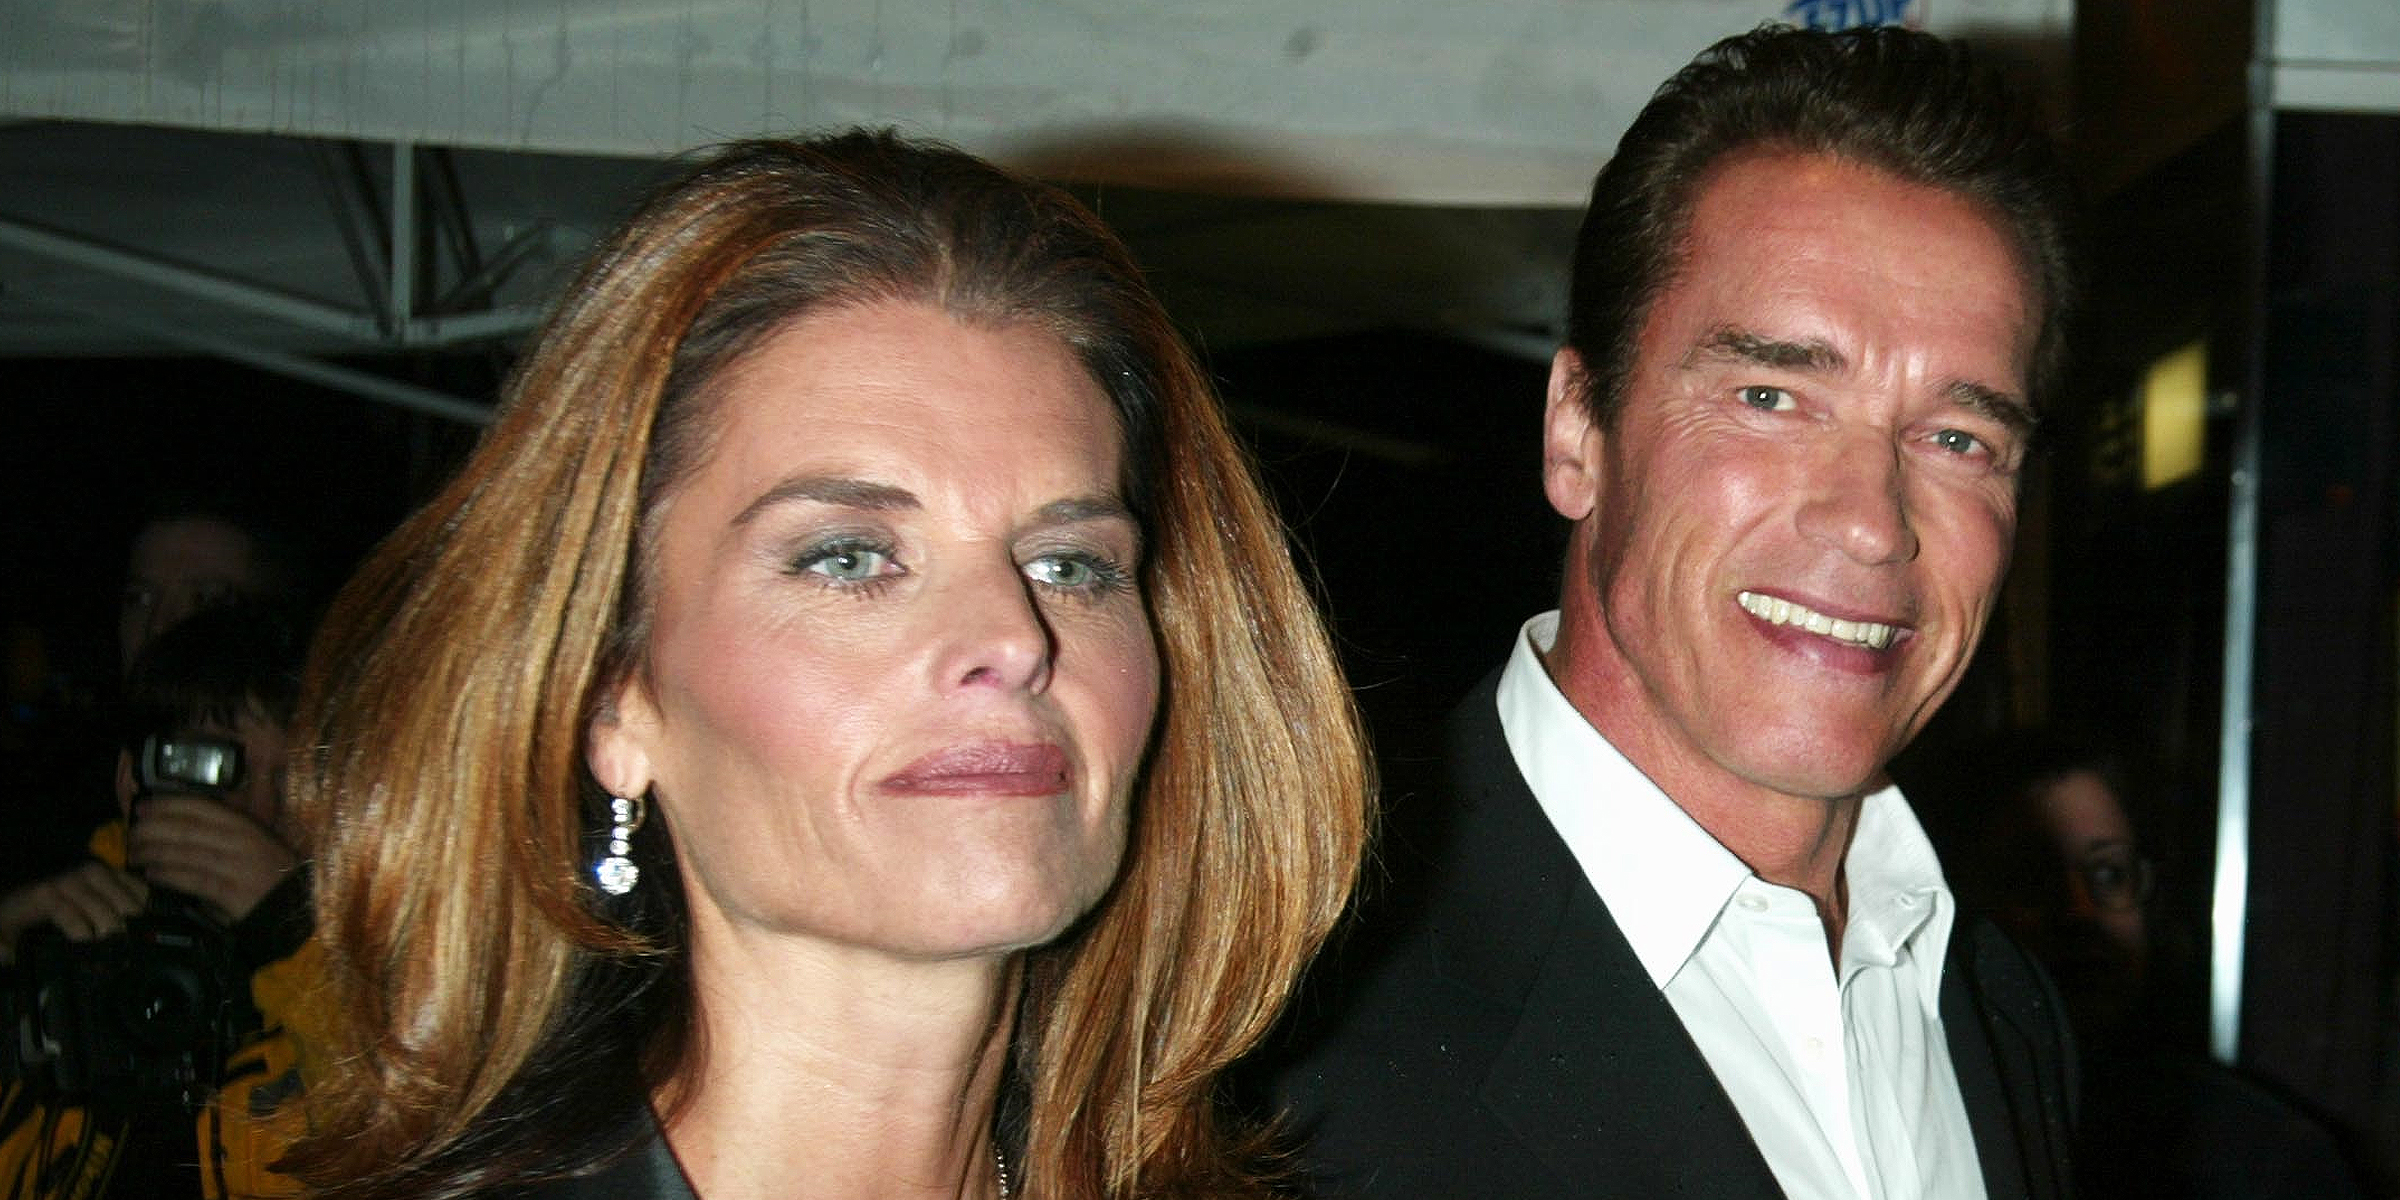 Arnold Schwarzenegger and Maria Shriver | Source: Getty Images